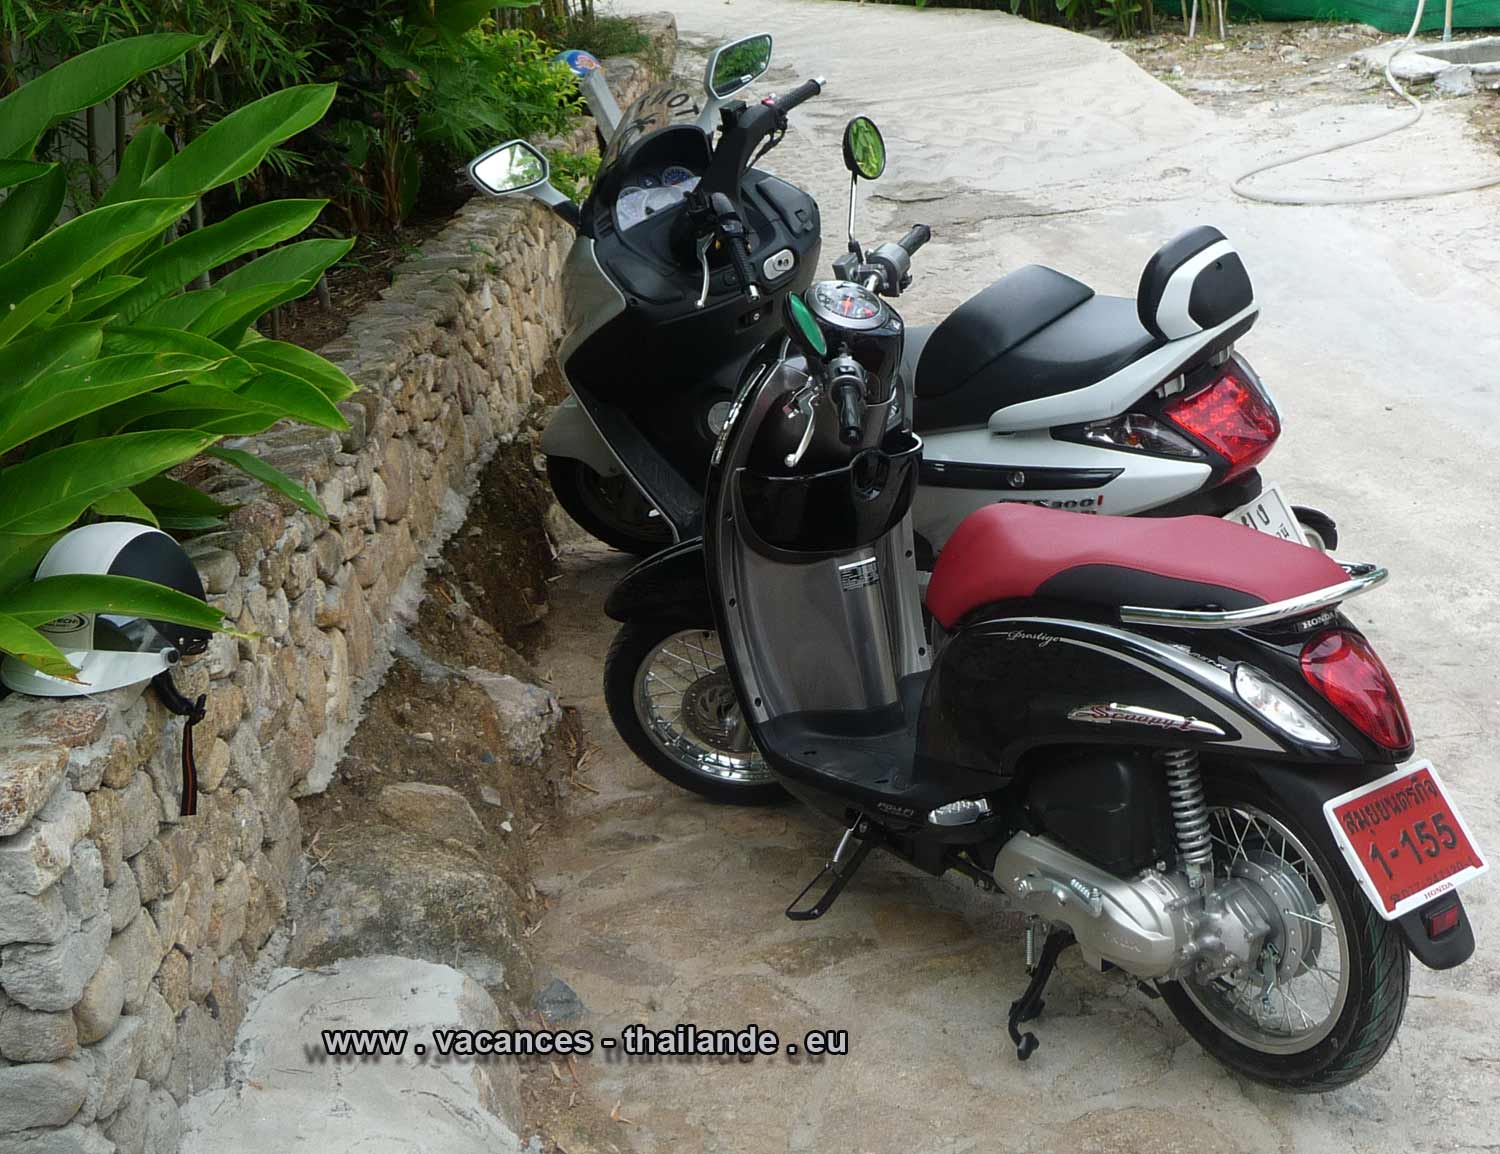 p32 scooters Honda of 110, 150, 300 ccm leased the house and are available on arrival and especially without formalities so called resting ansi that helmets has samui koh thailande.html